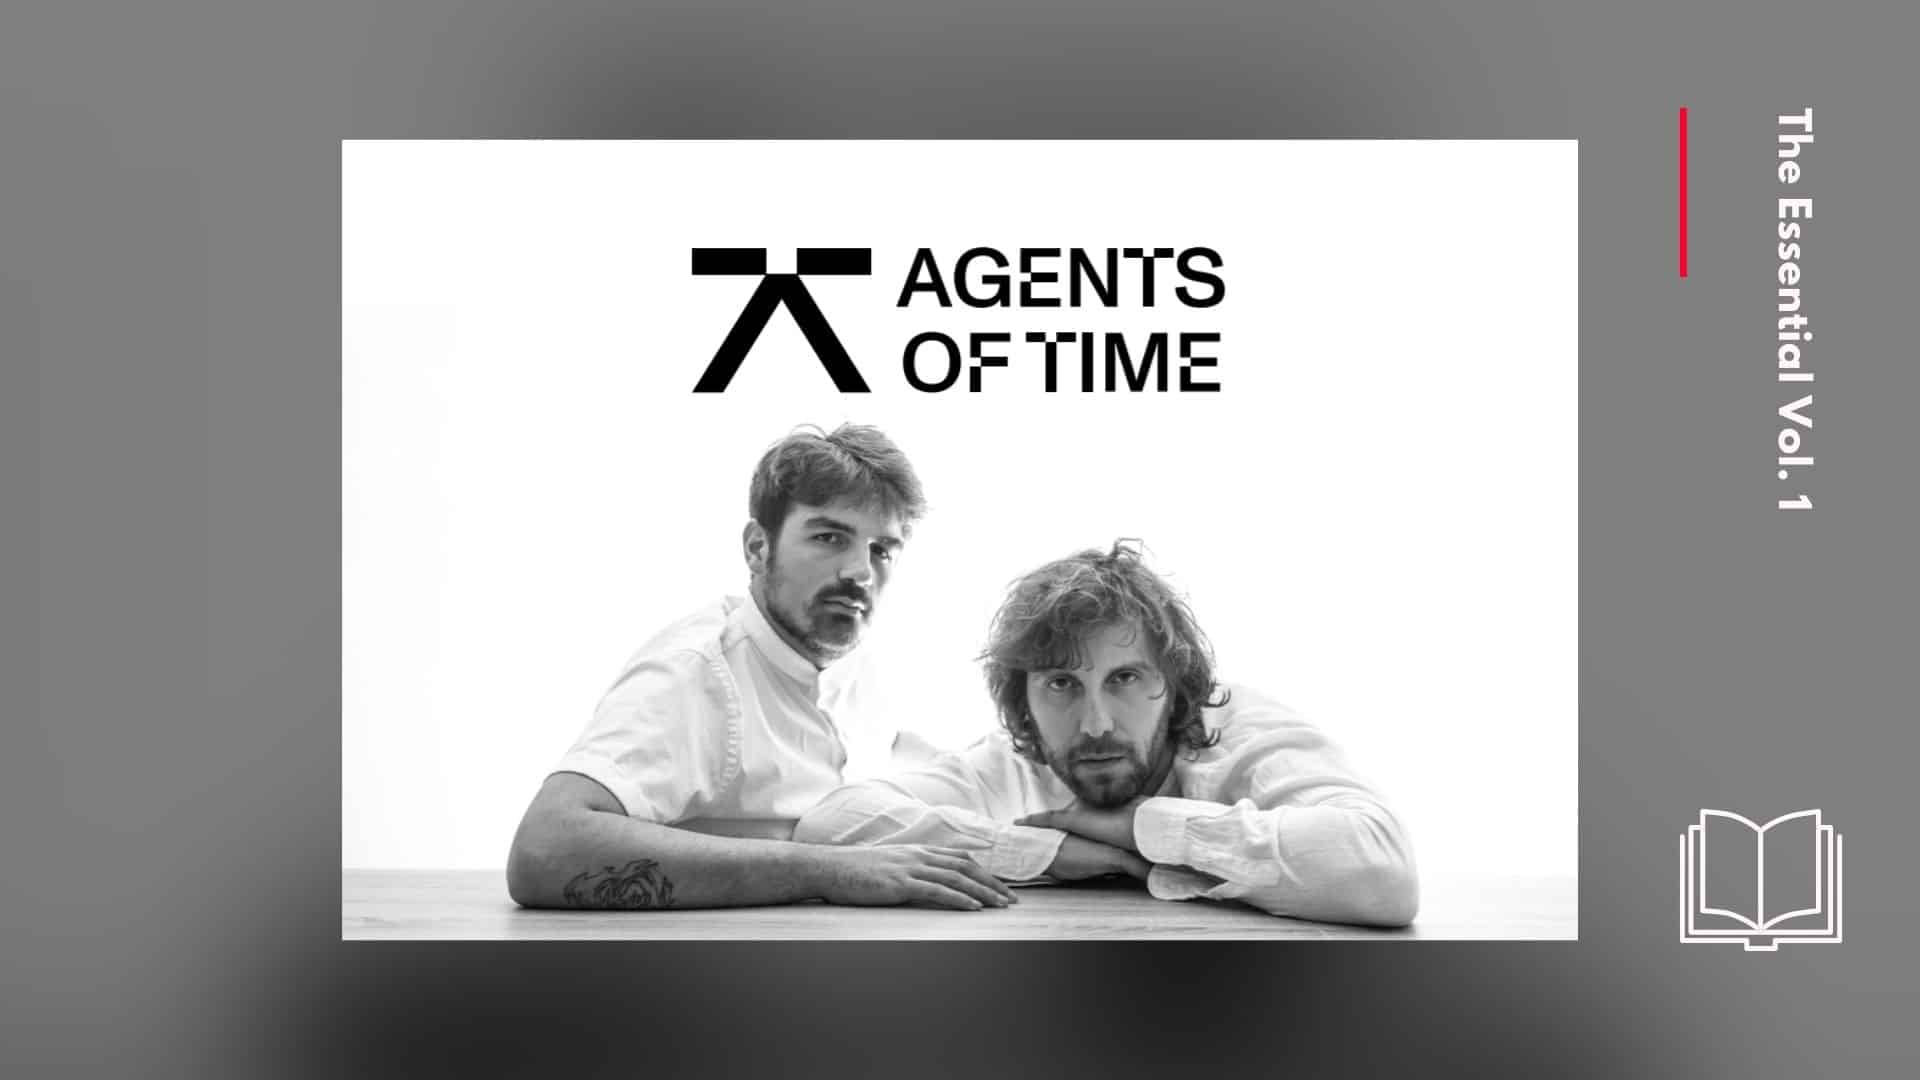 agents of time plugins & gear